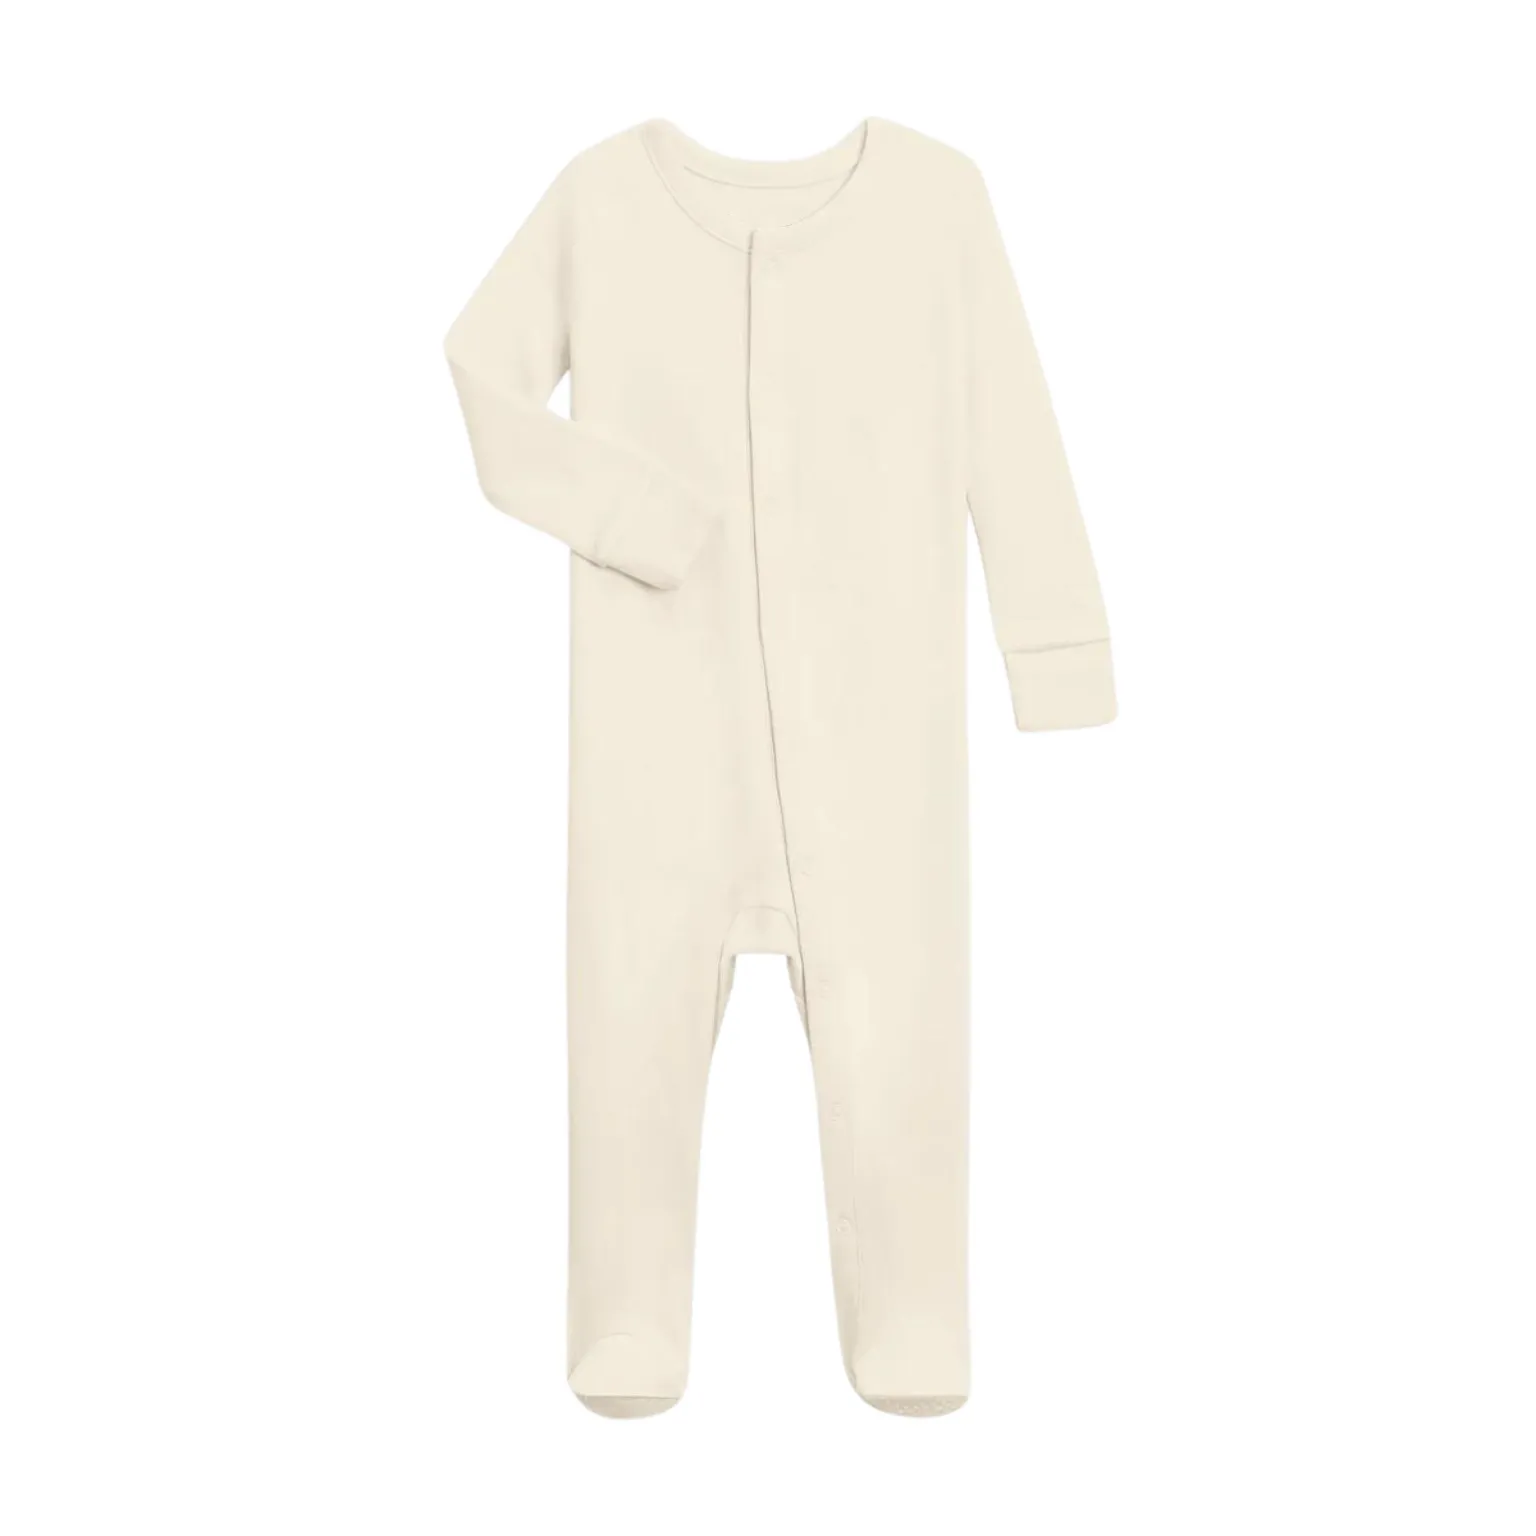 Manufacturing Cotton Pajamas with superior quality